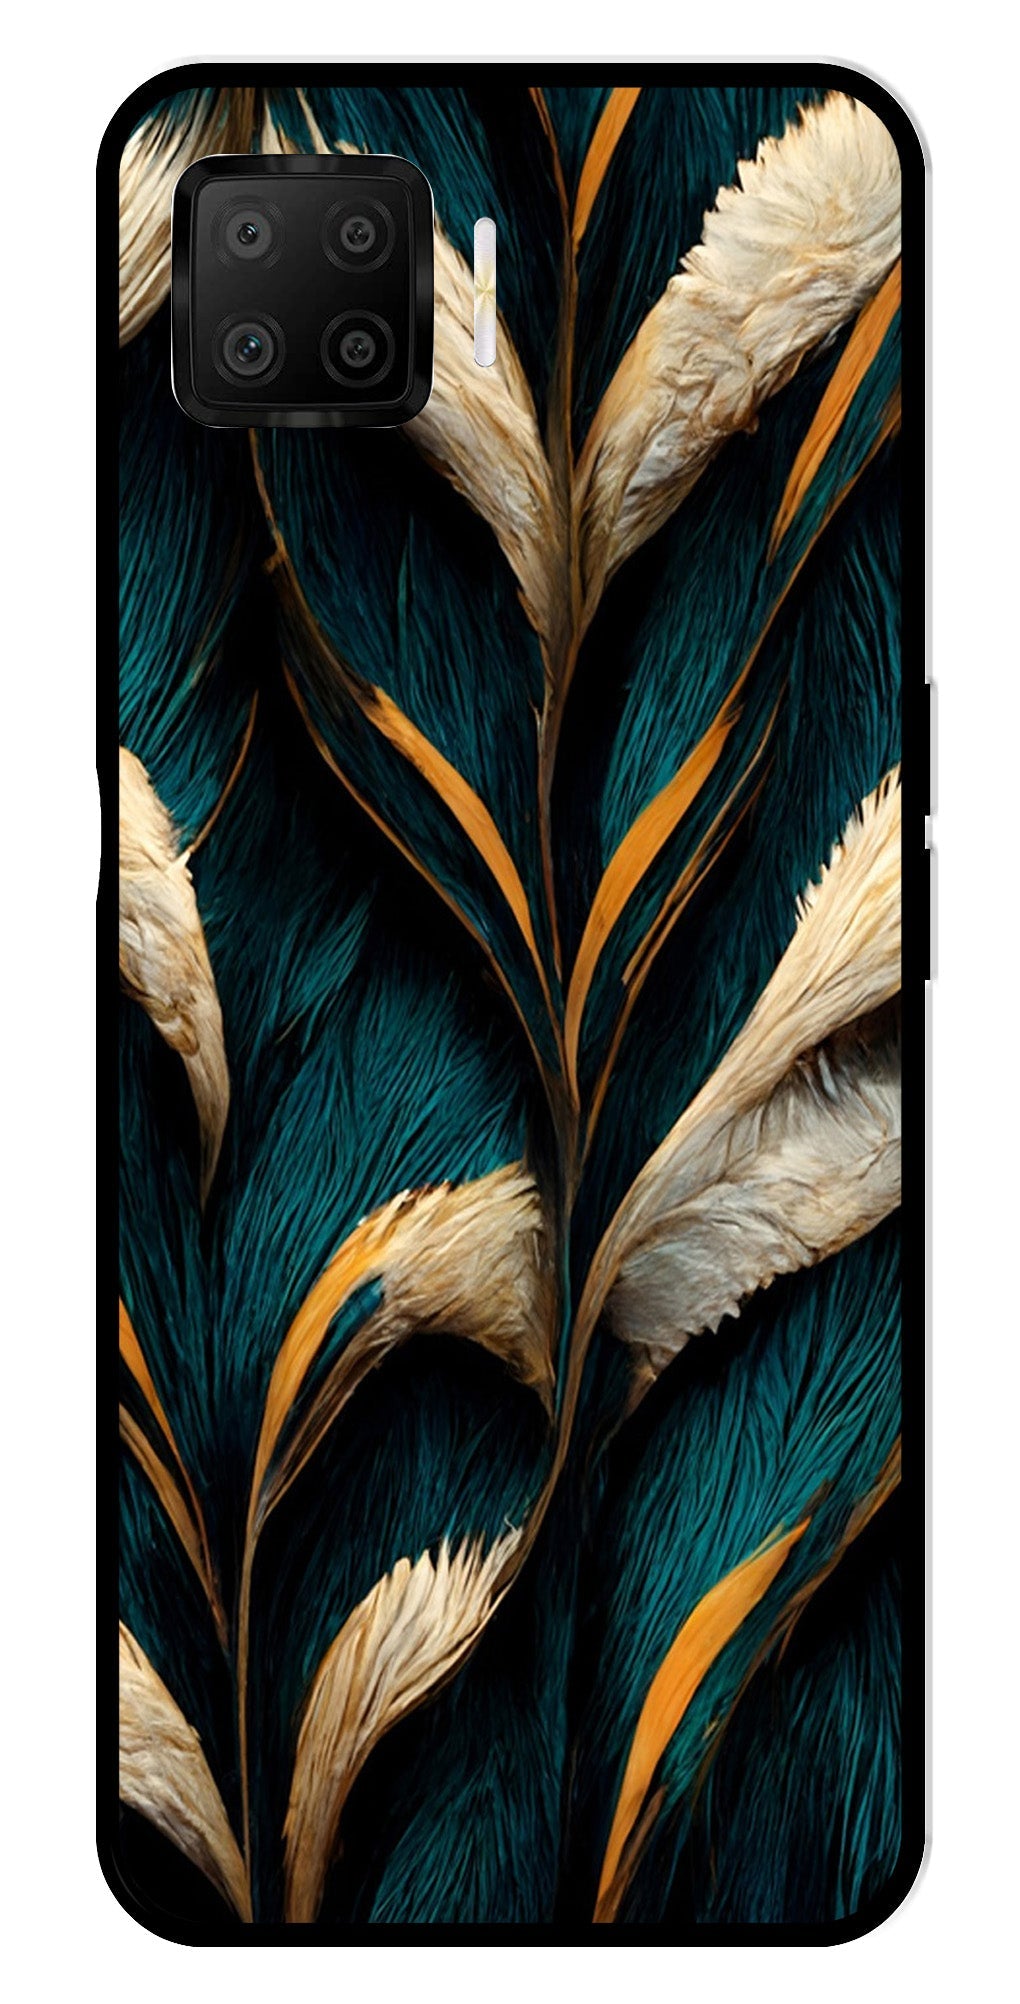 Feathers Metal Mobile Case for Oppo A73   (Design No -30)